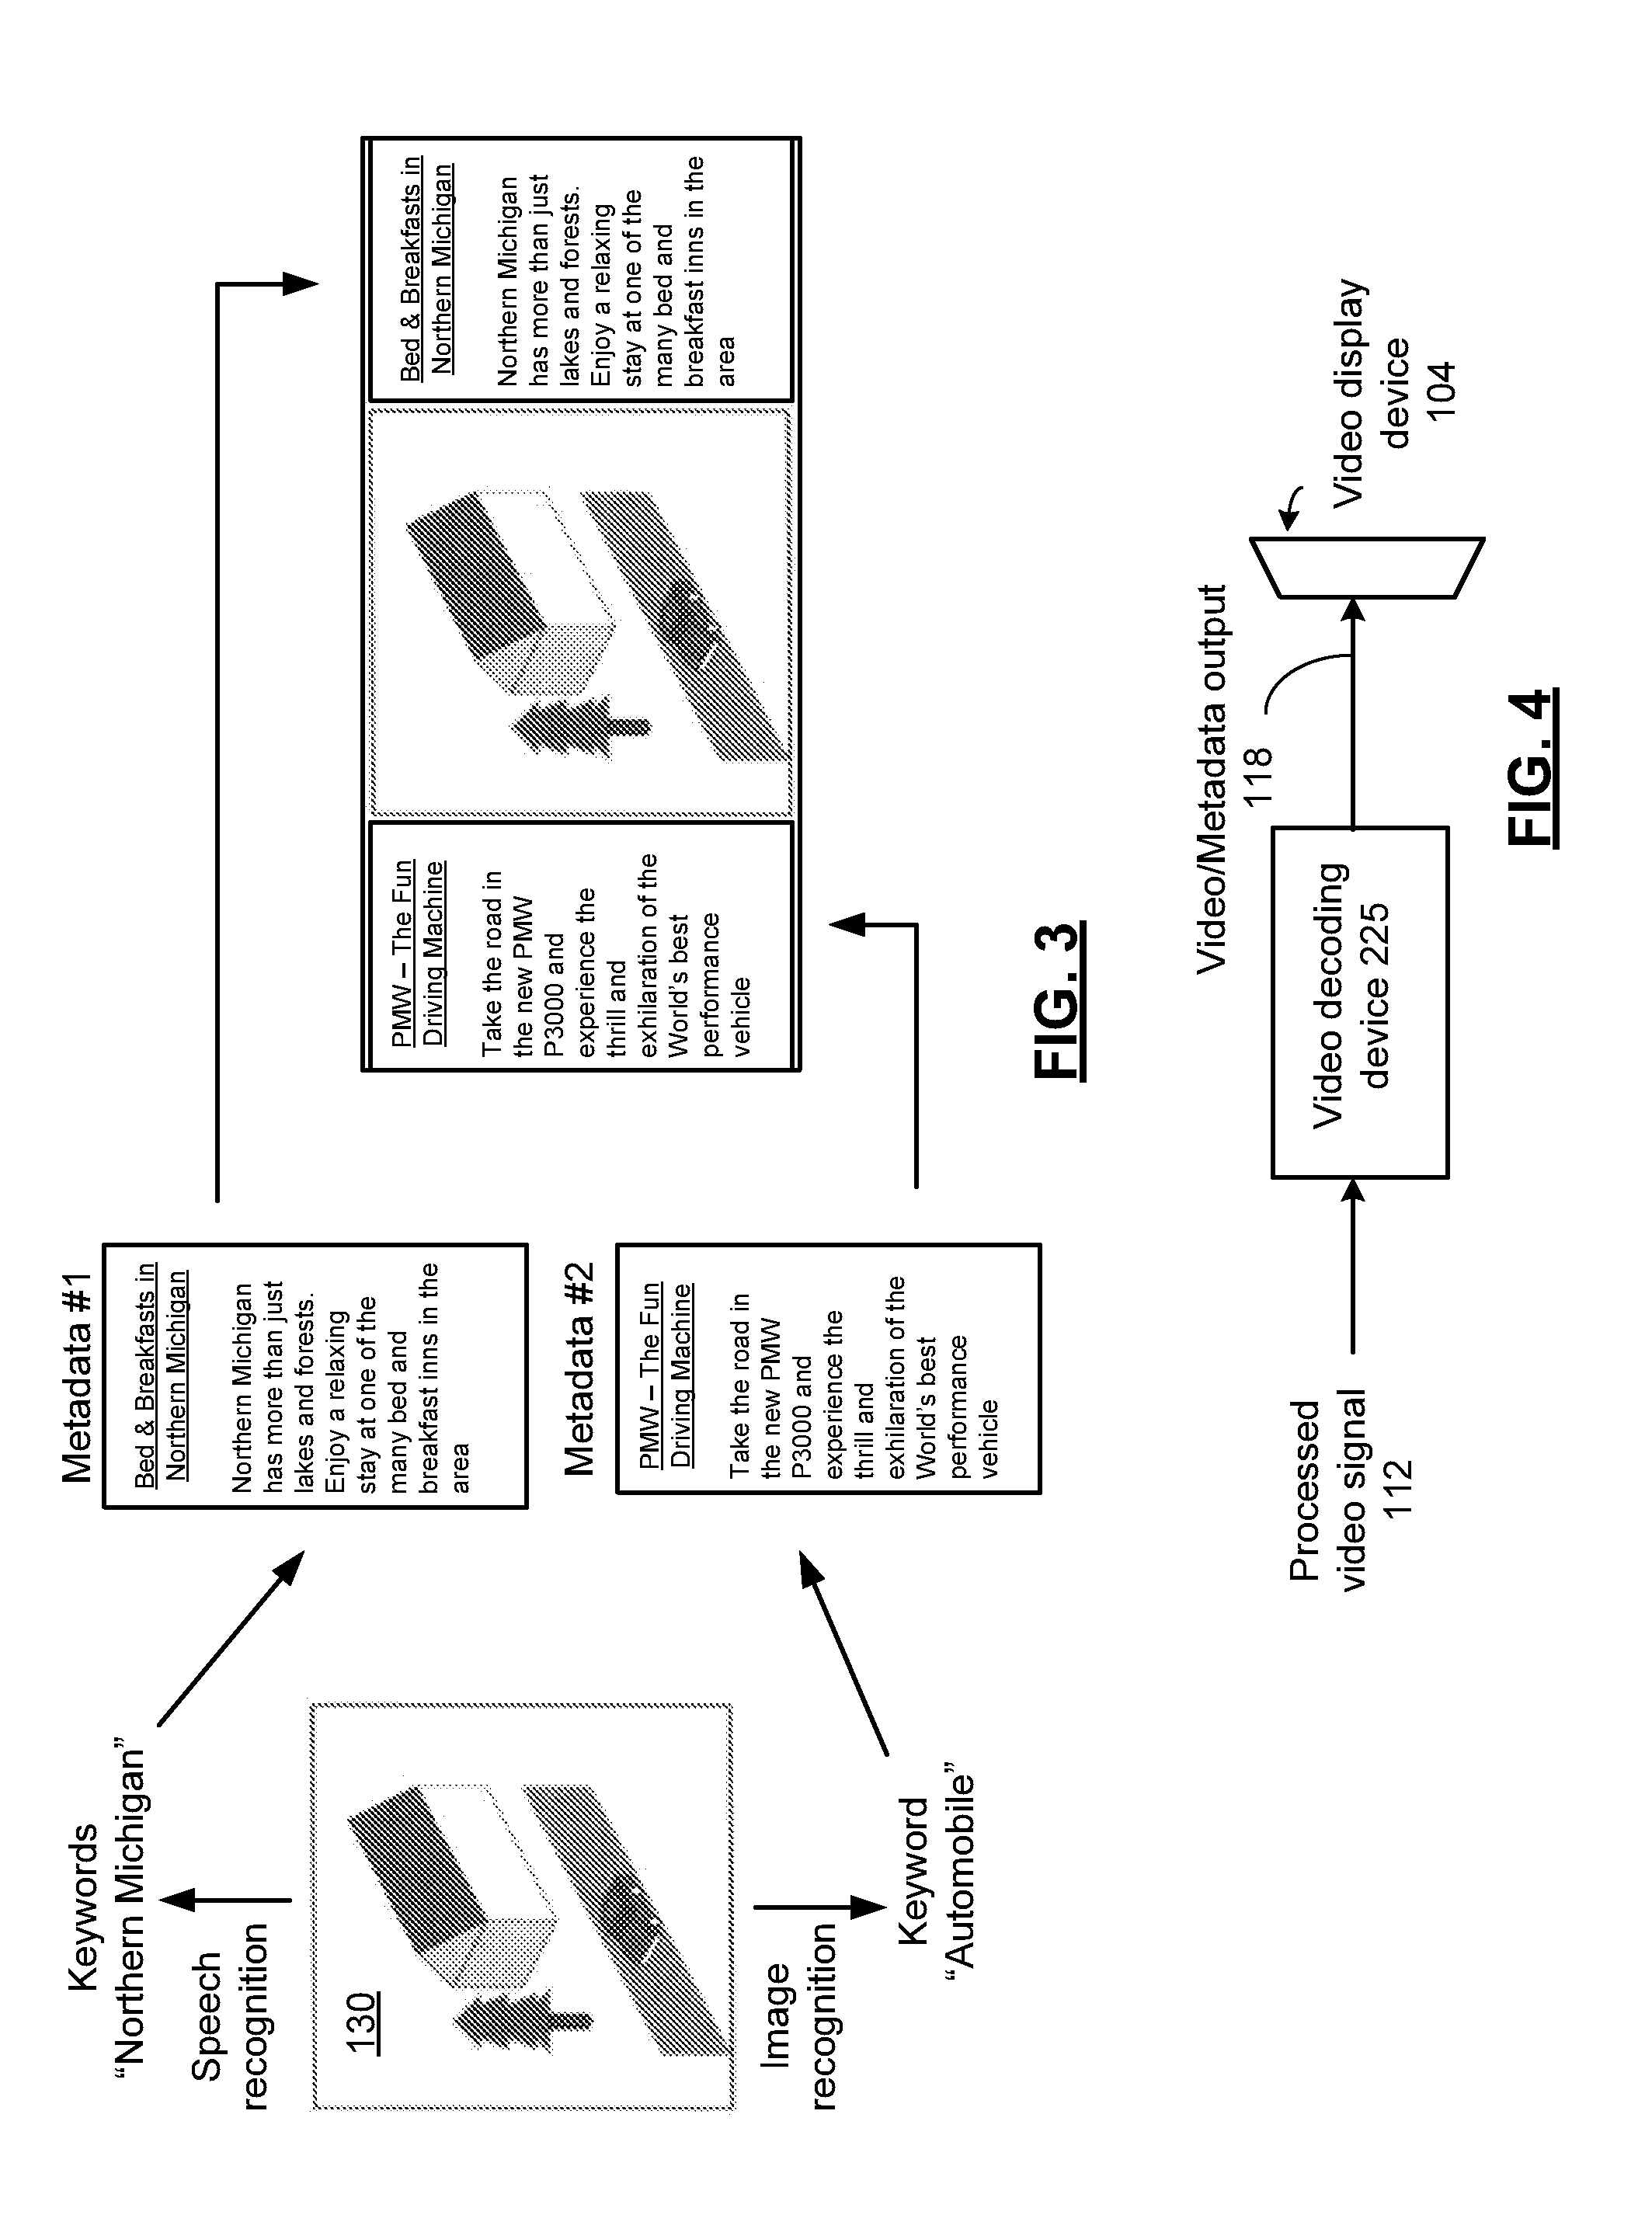 Video decoding device for extracting embedded metadata and methods for use therewith